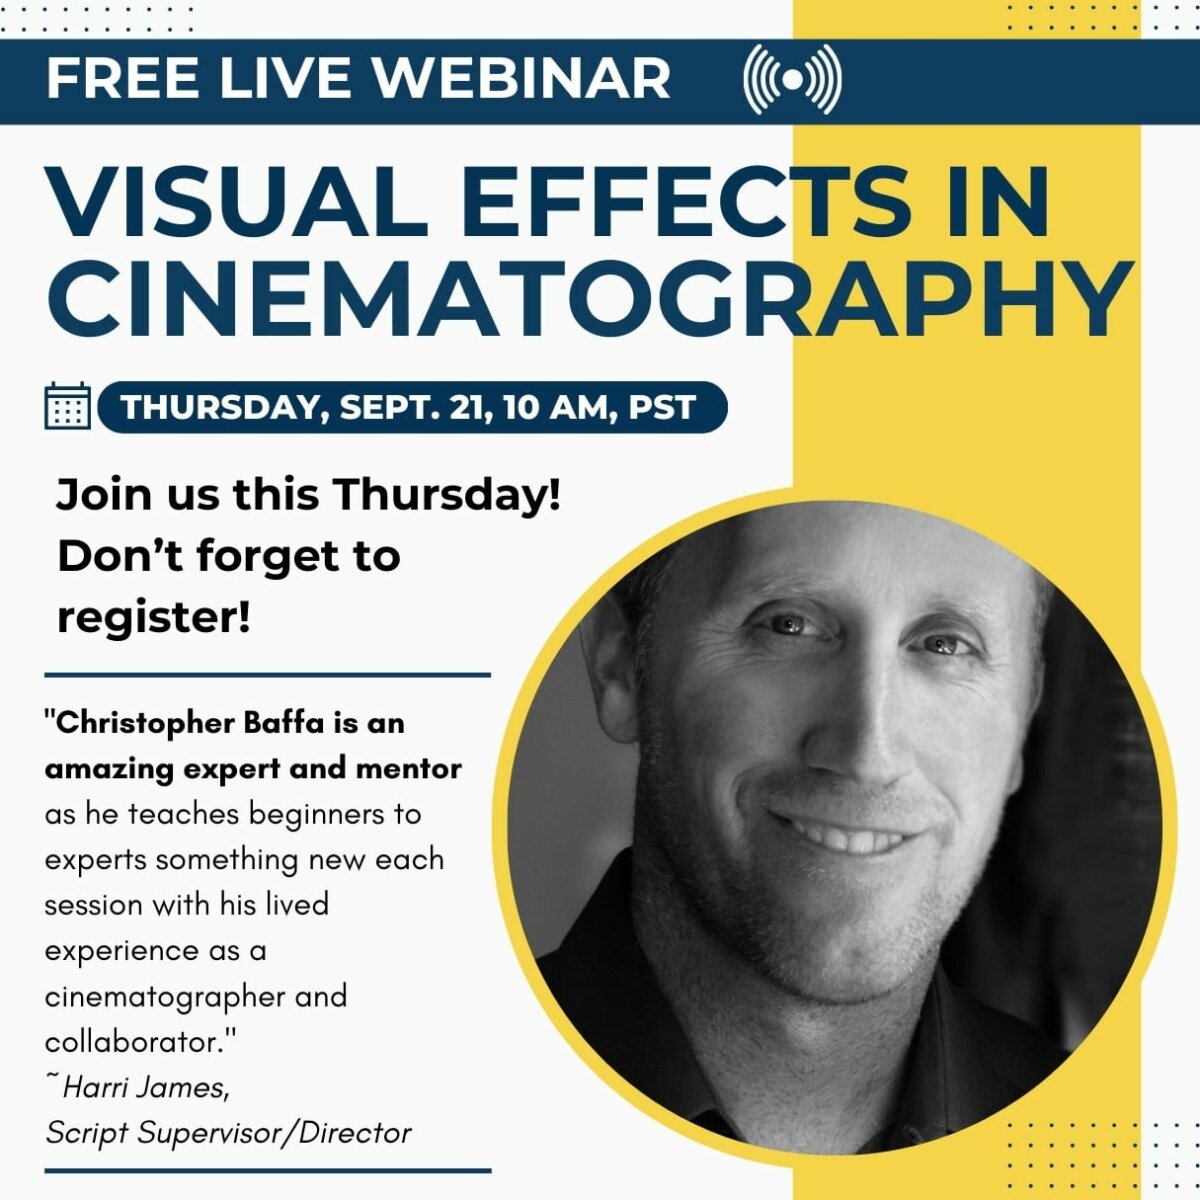 Live Webinar, Visual Effects in Cinematography with Christopher Baffa ASC